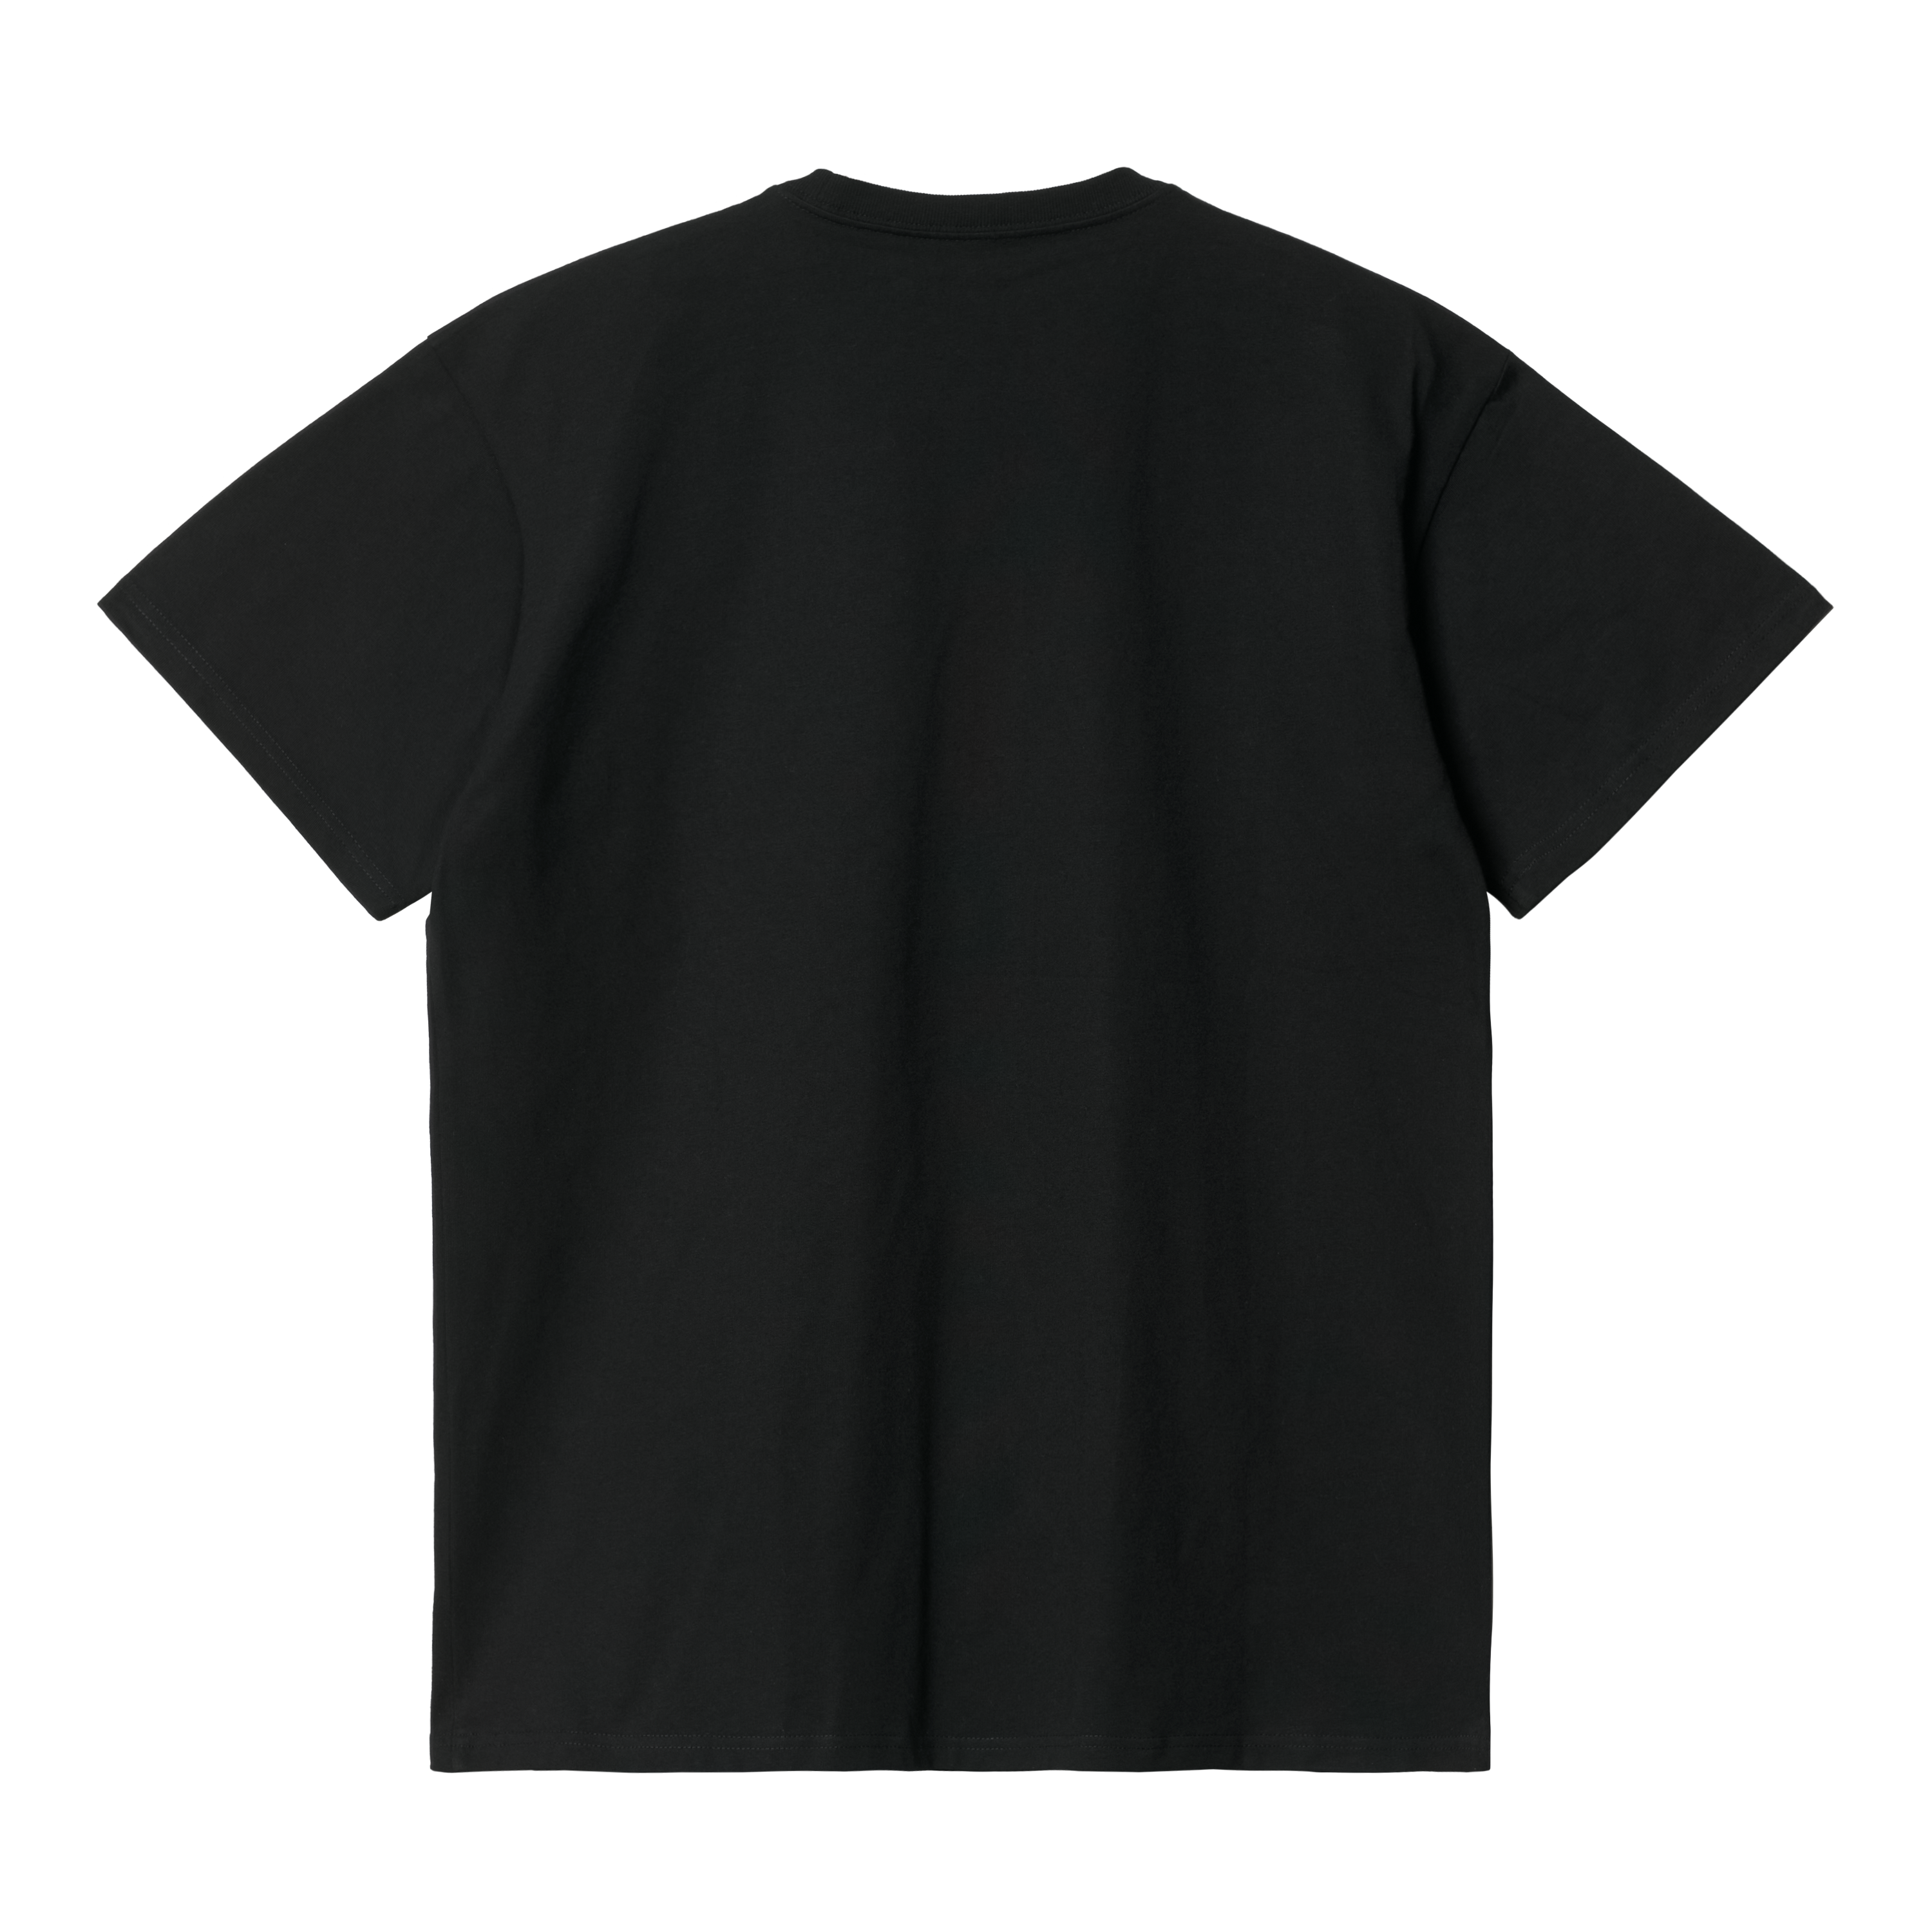 Carhartt WIP S/S Chase T-Shirt, Black / Gold | Official Online Store